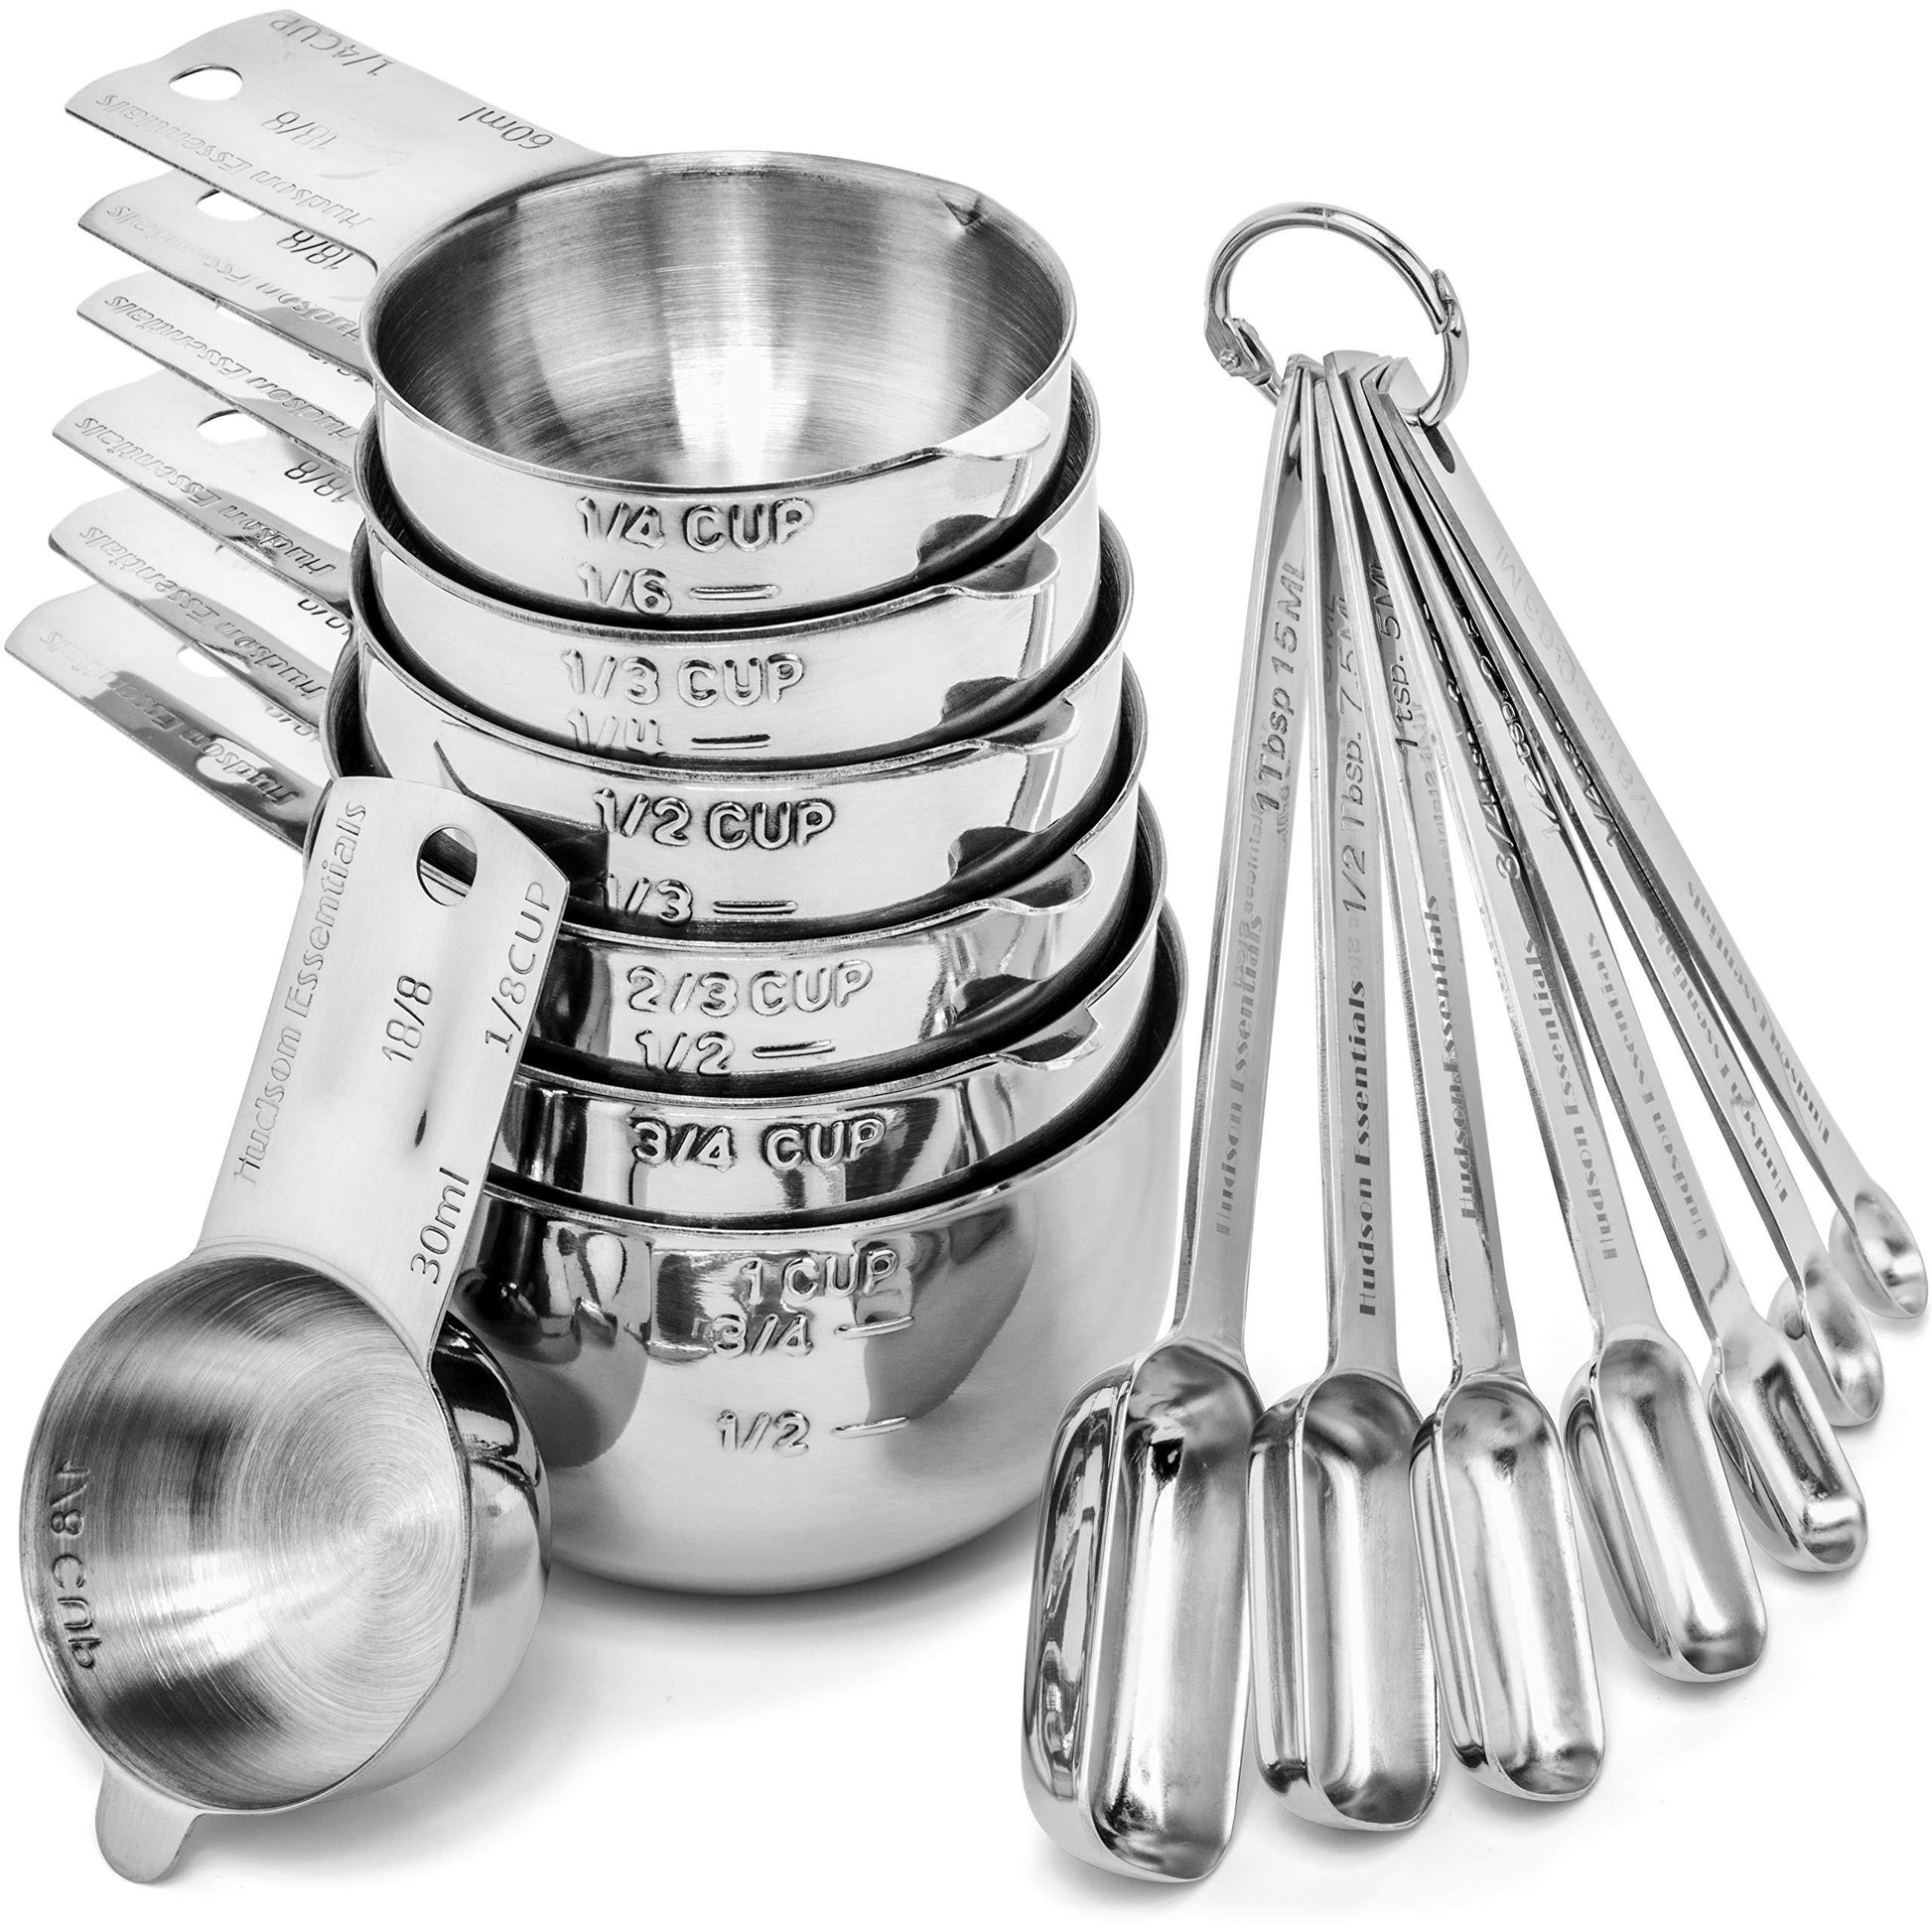 Hudson Essentials Stainless Steel Measuring Cups and Spoons Set (14 Piece Set) - CookCave